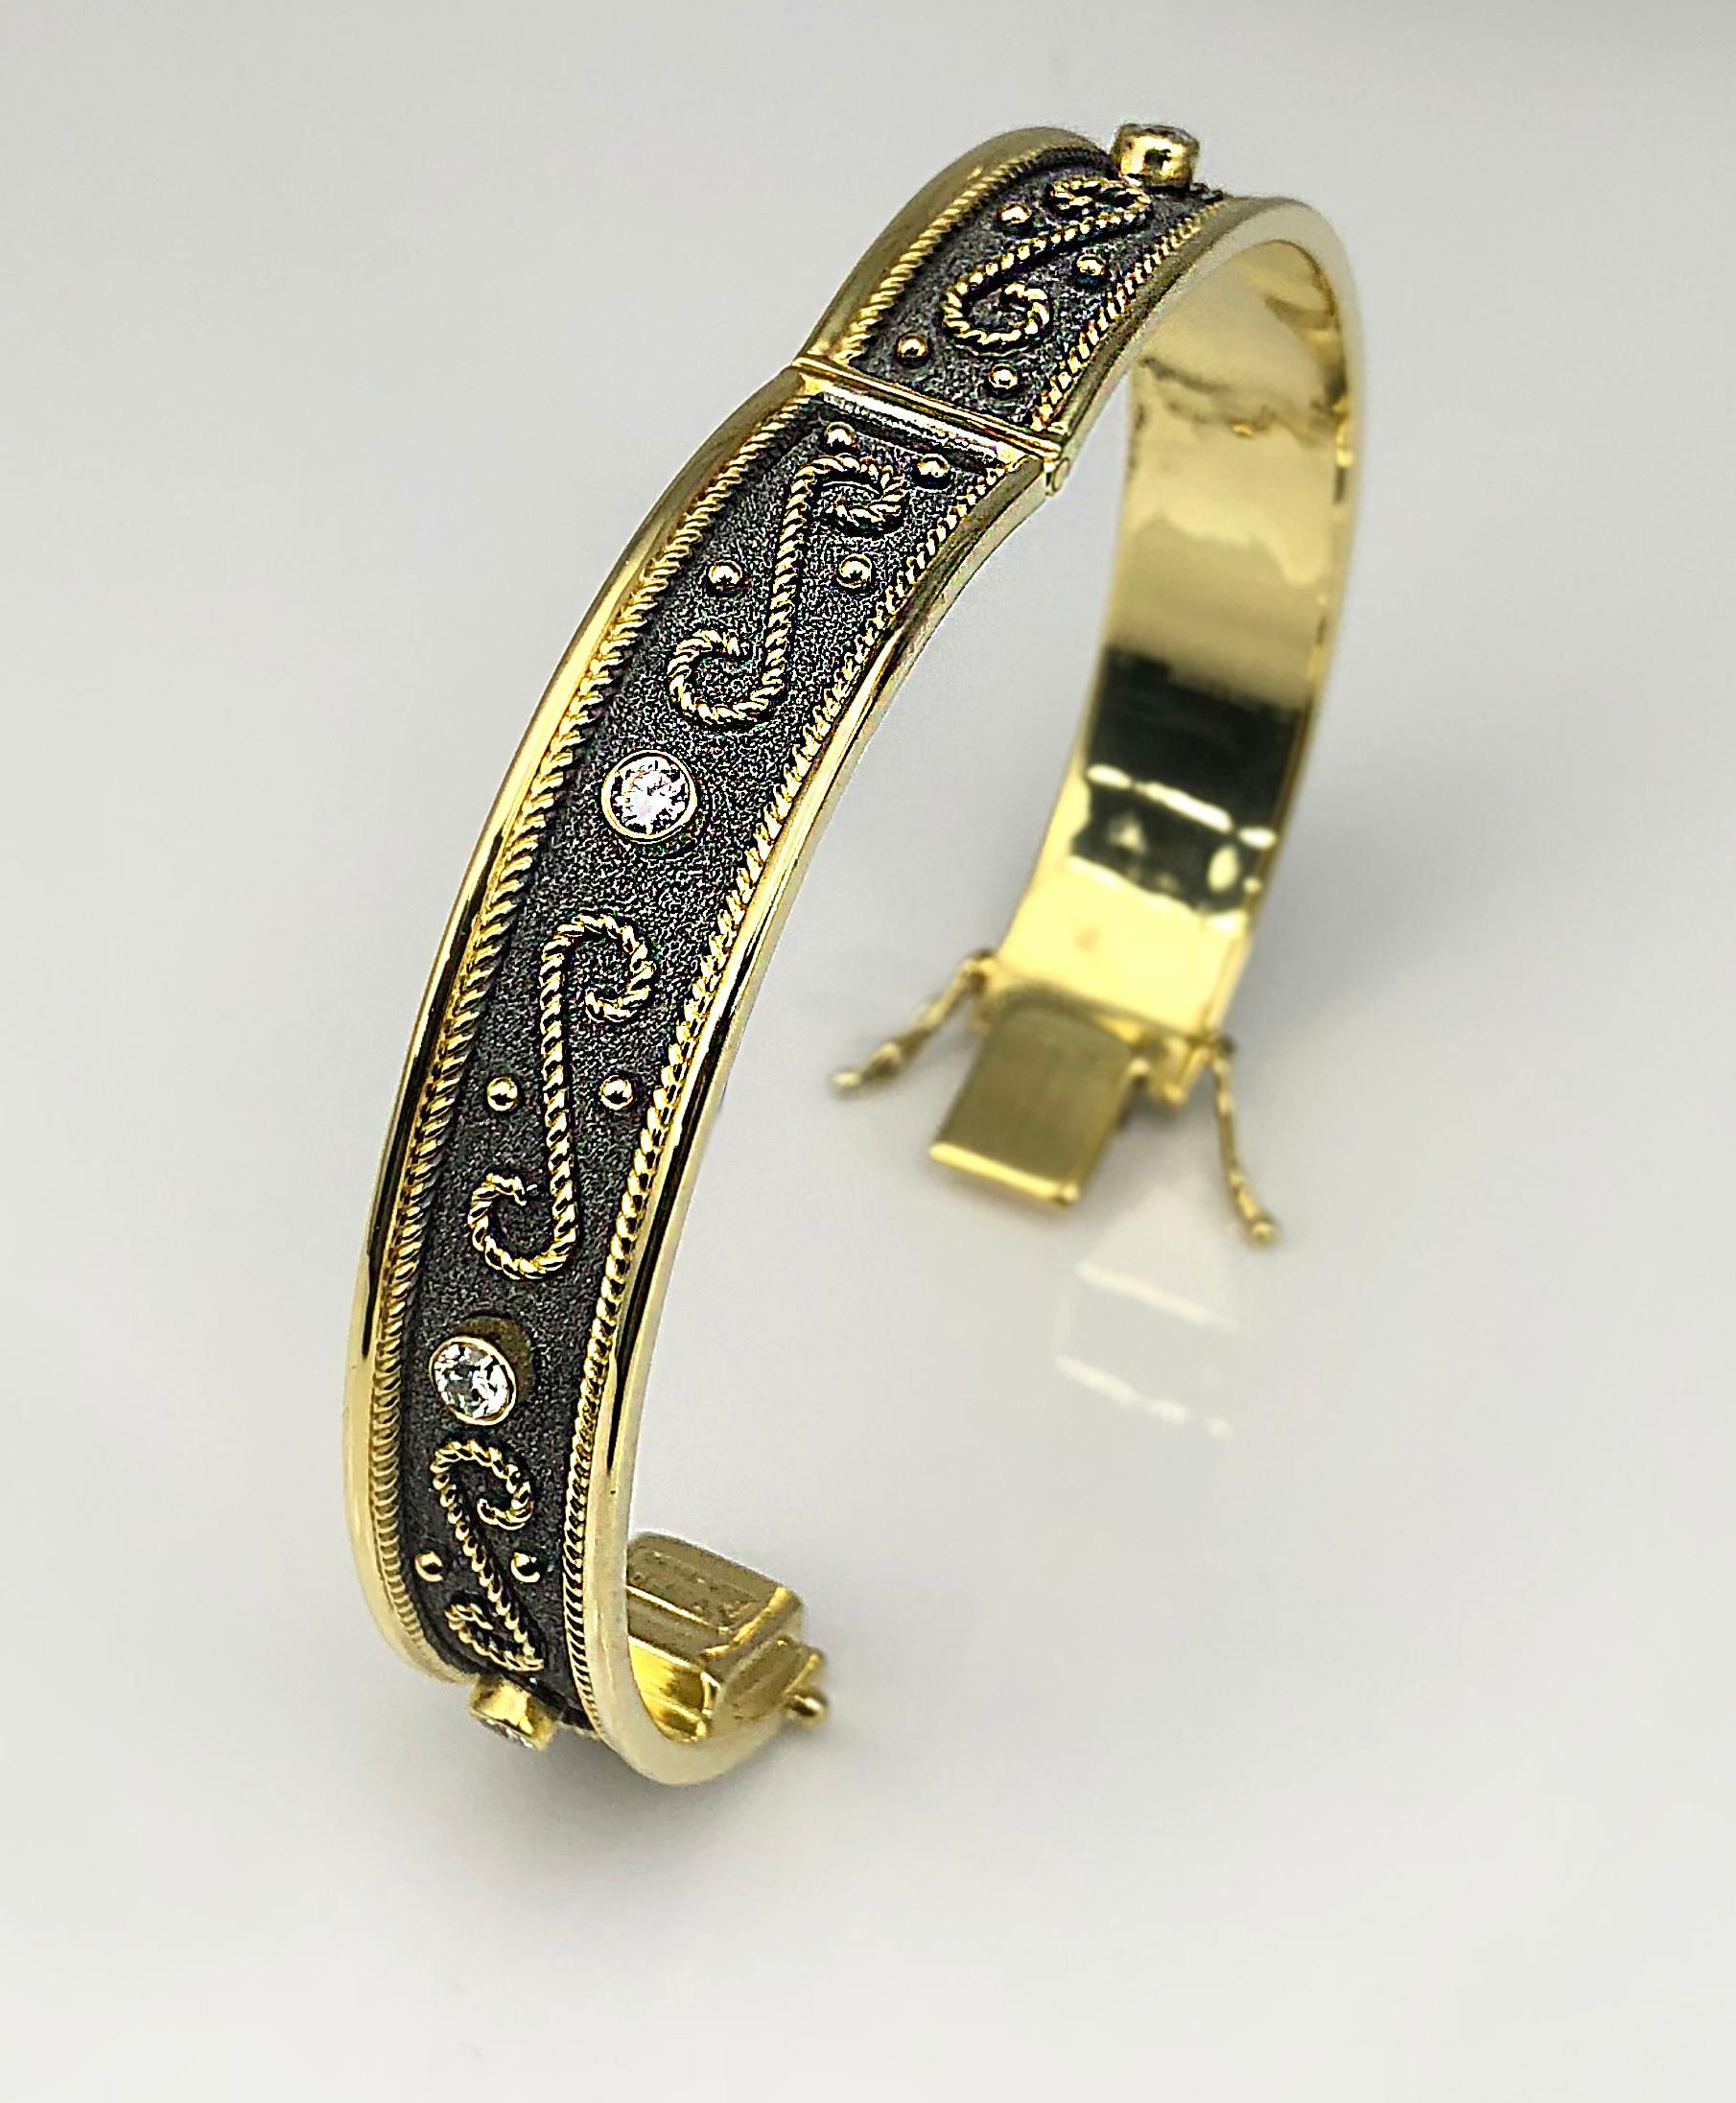 S.Georgios designer Bangle Bracelet is handmade in 18 Karat Yellow Gold and all custom-made. This stunning bracelet is microscopically decorated with granulation work in Byzantine style - 